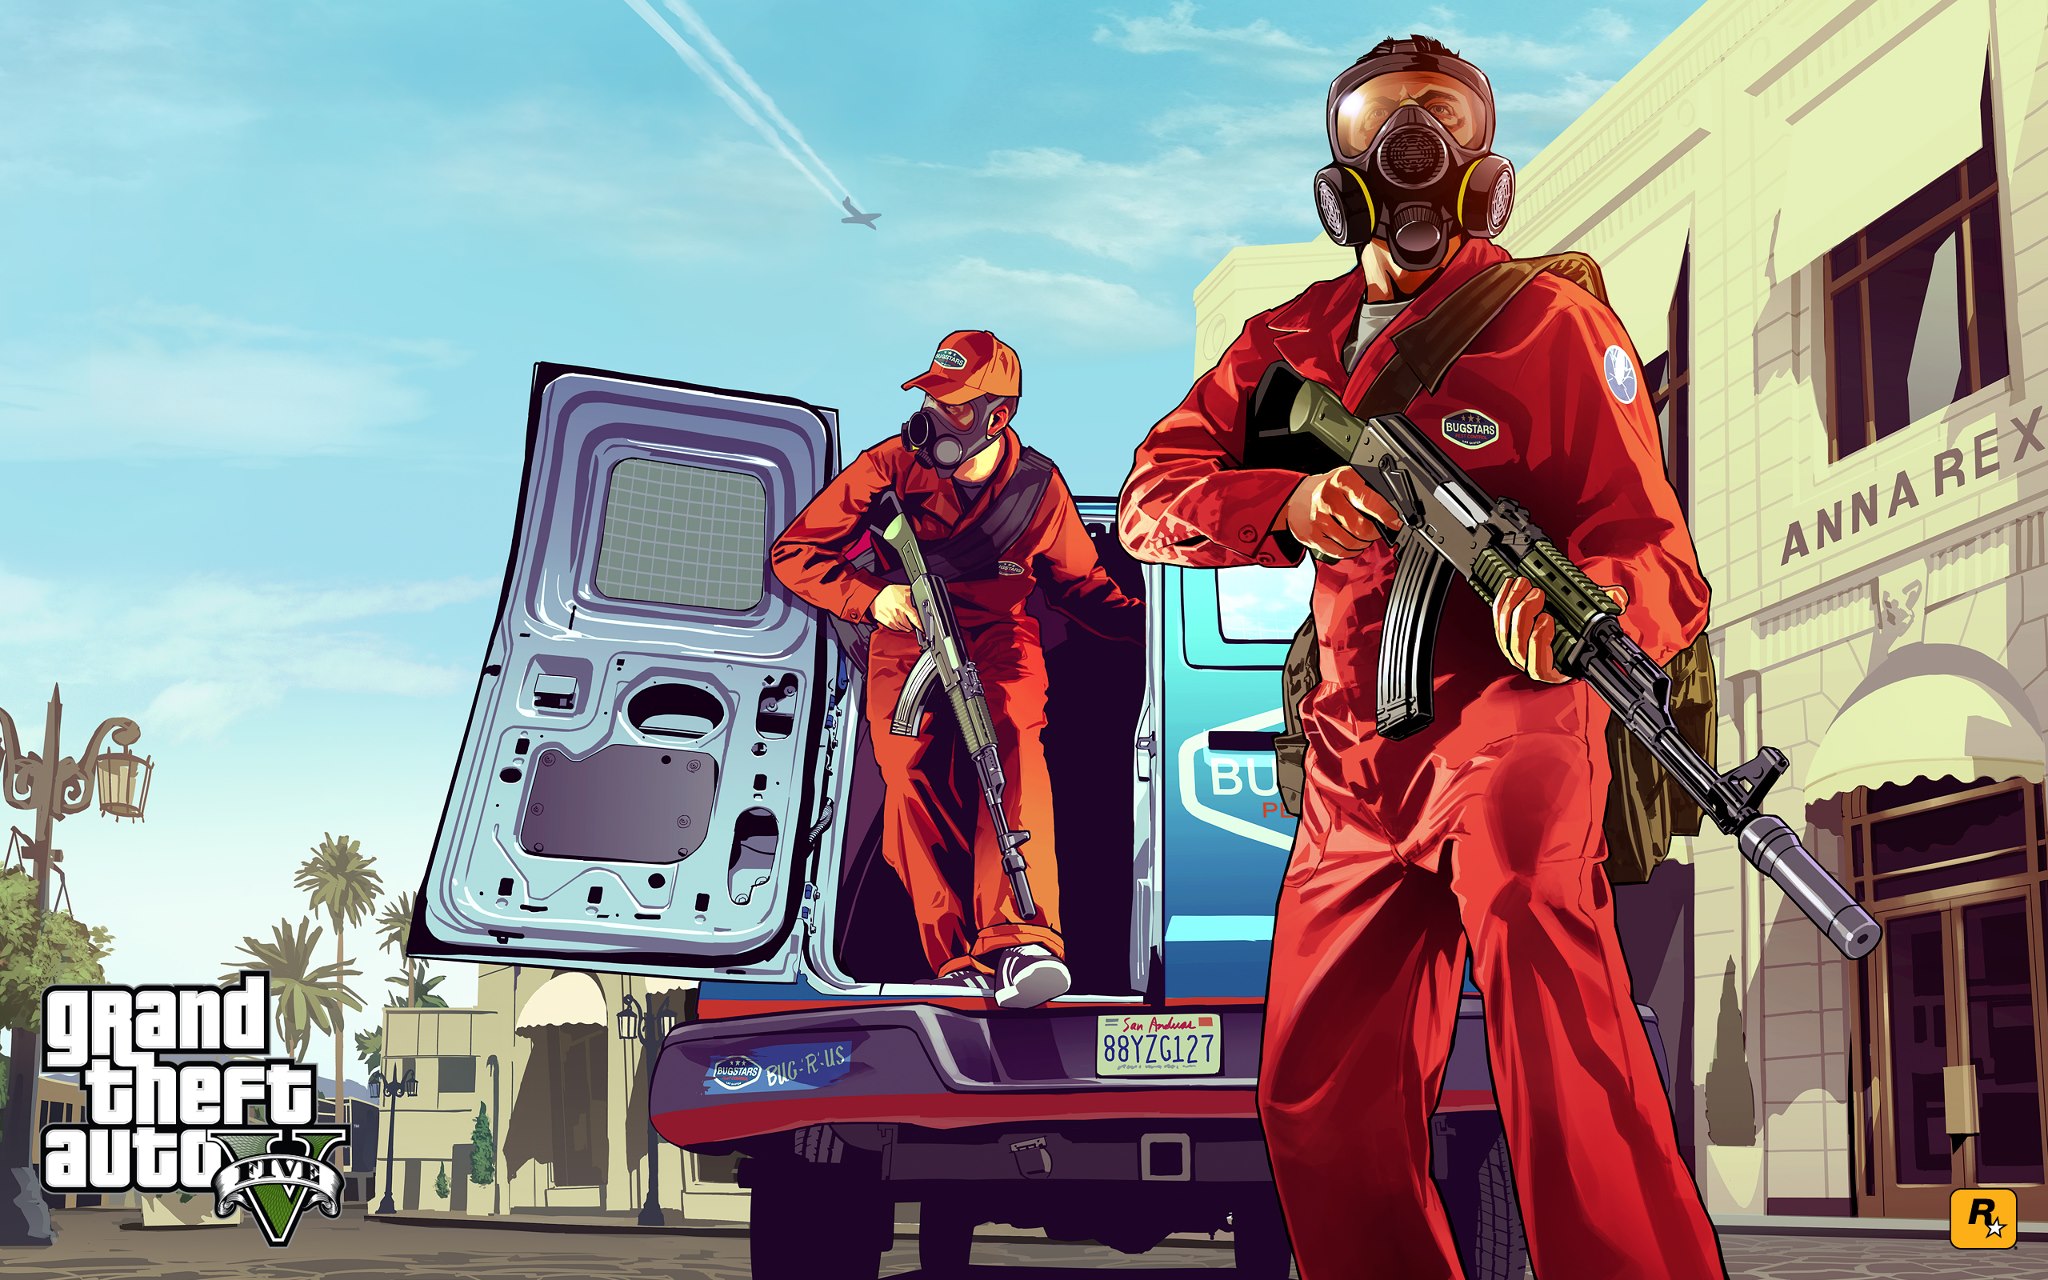 Gta Artwork Reveal Hidden Secrets That You May Have Missed